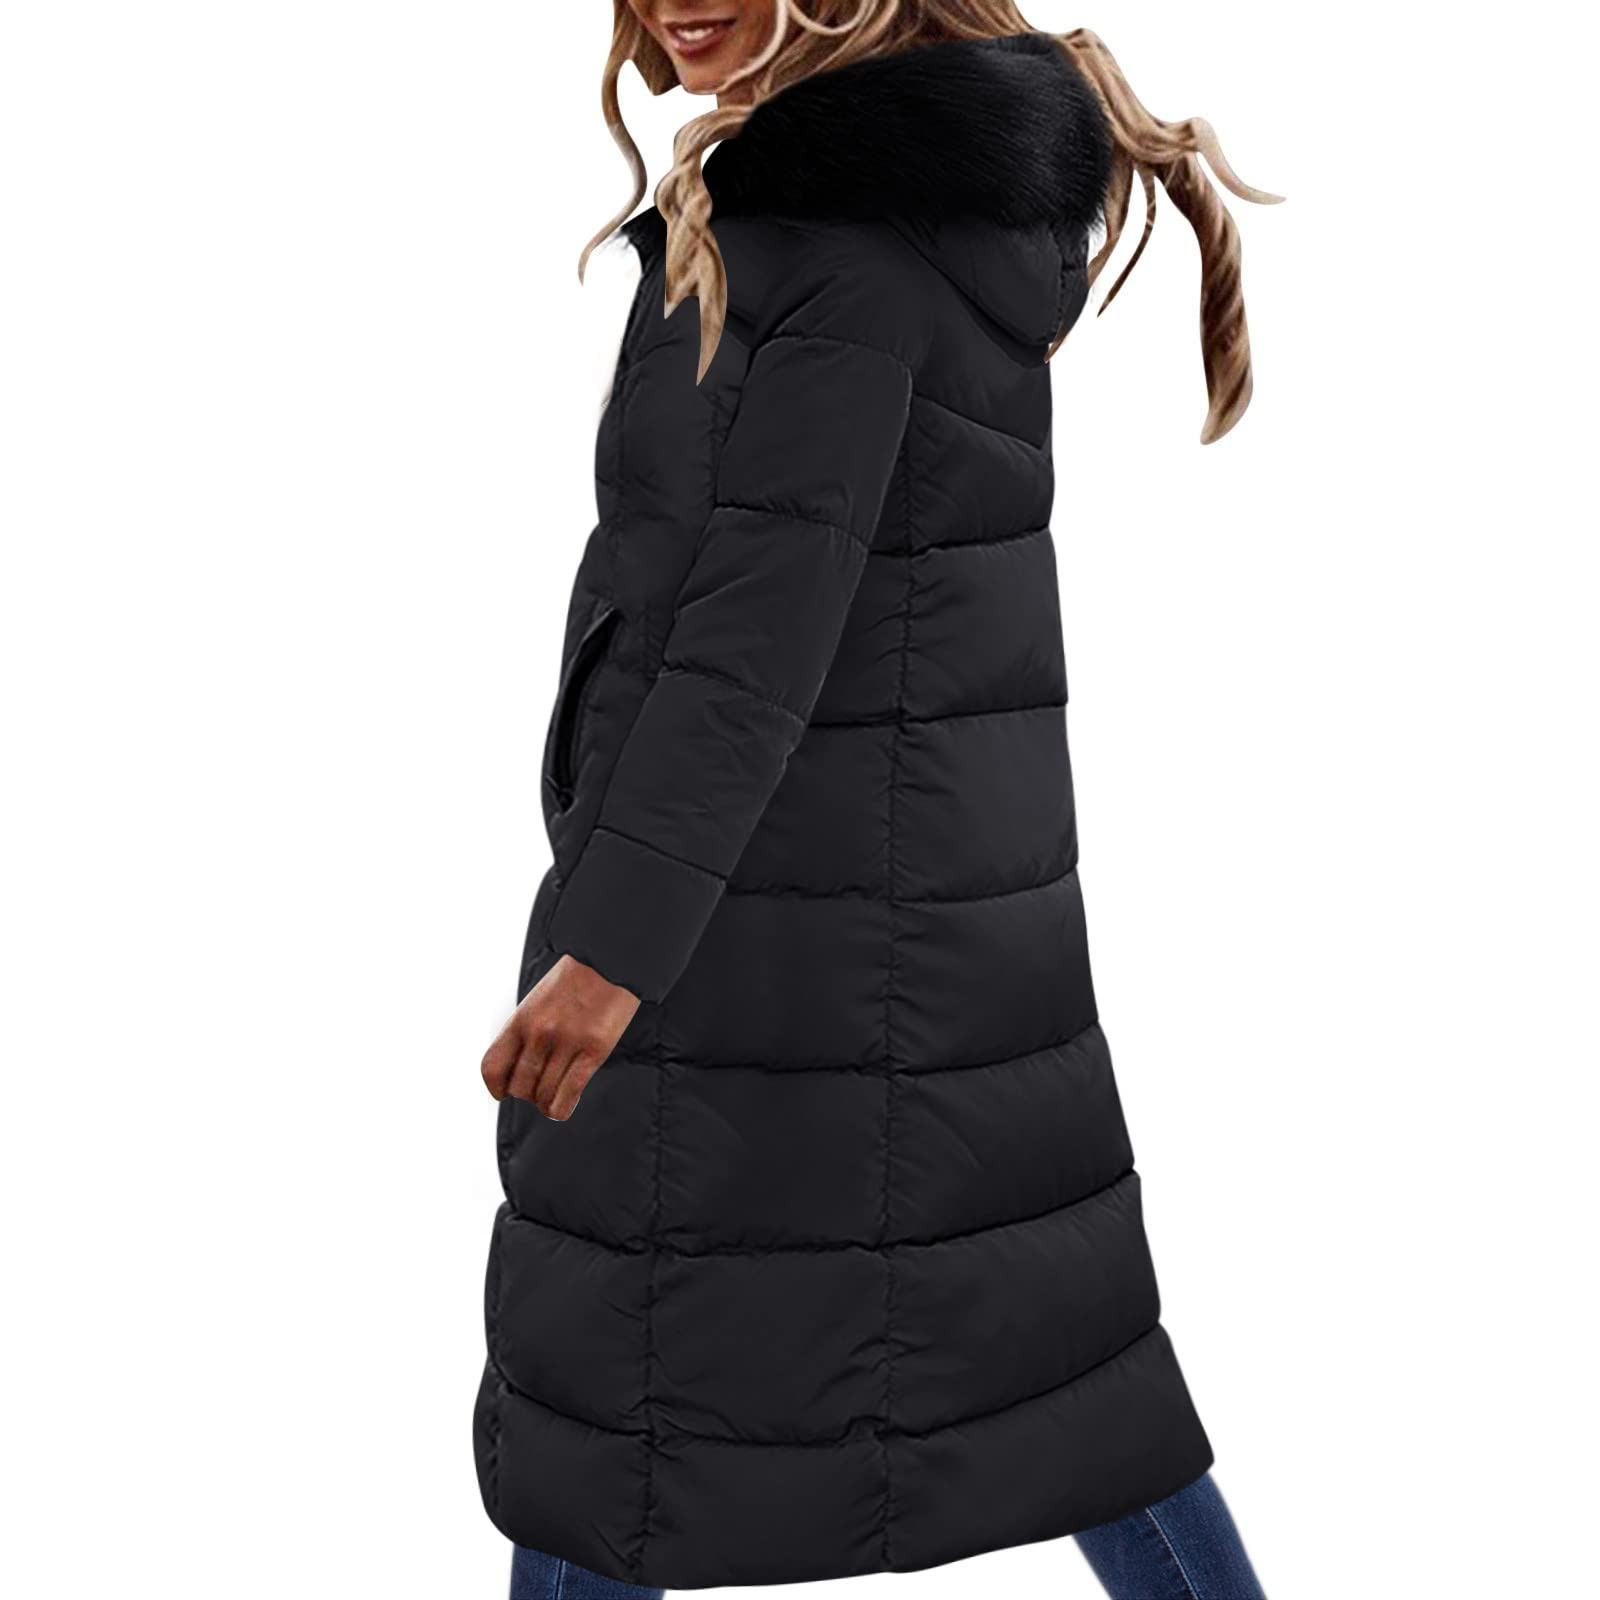 IROINNID Puffer Jacket for Women Winter Warm Long Quilted Coat Hooded ...